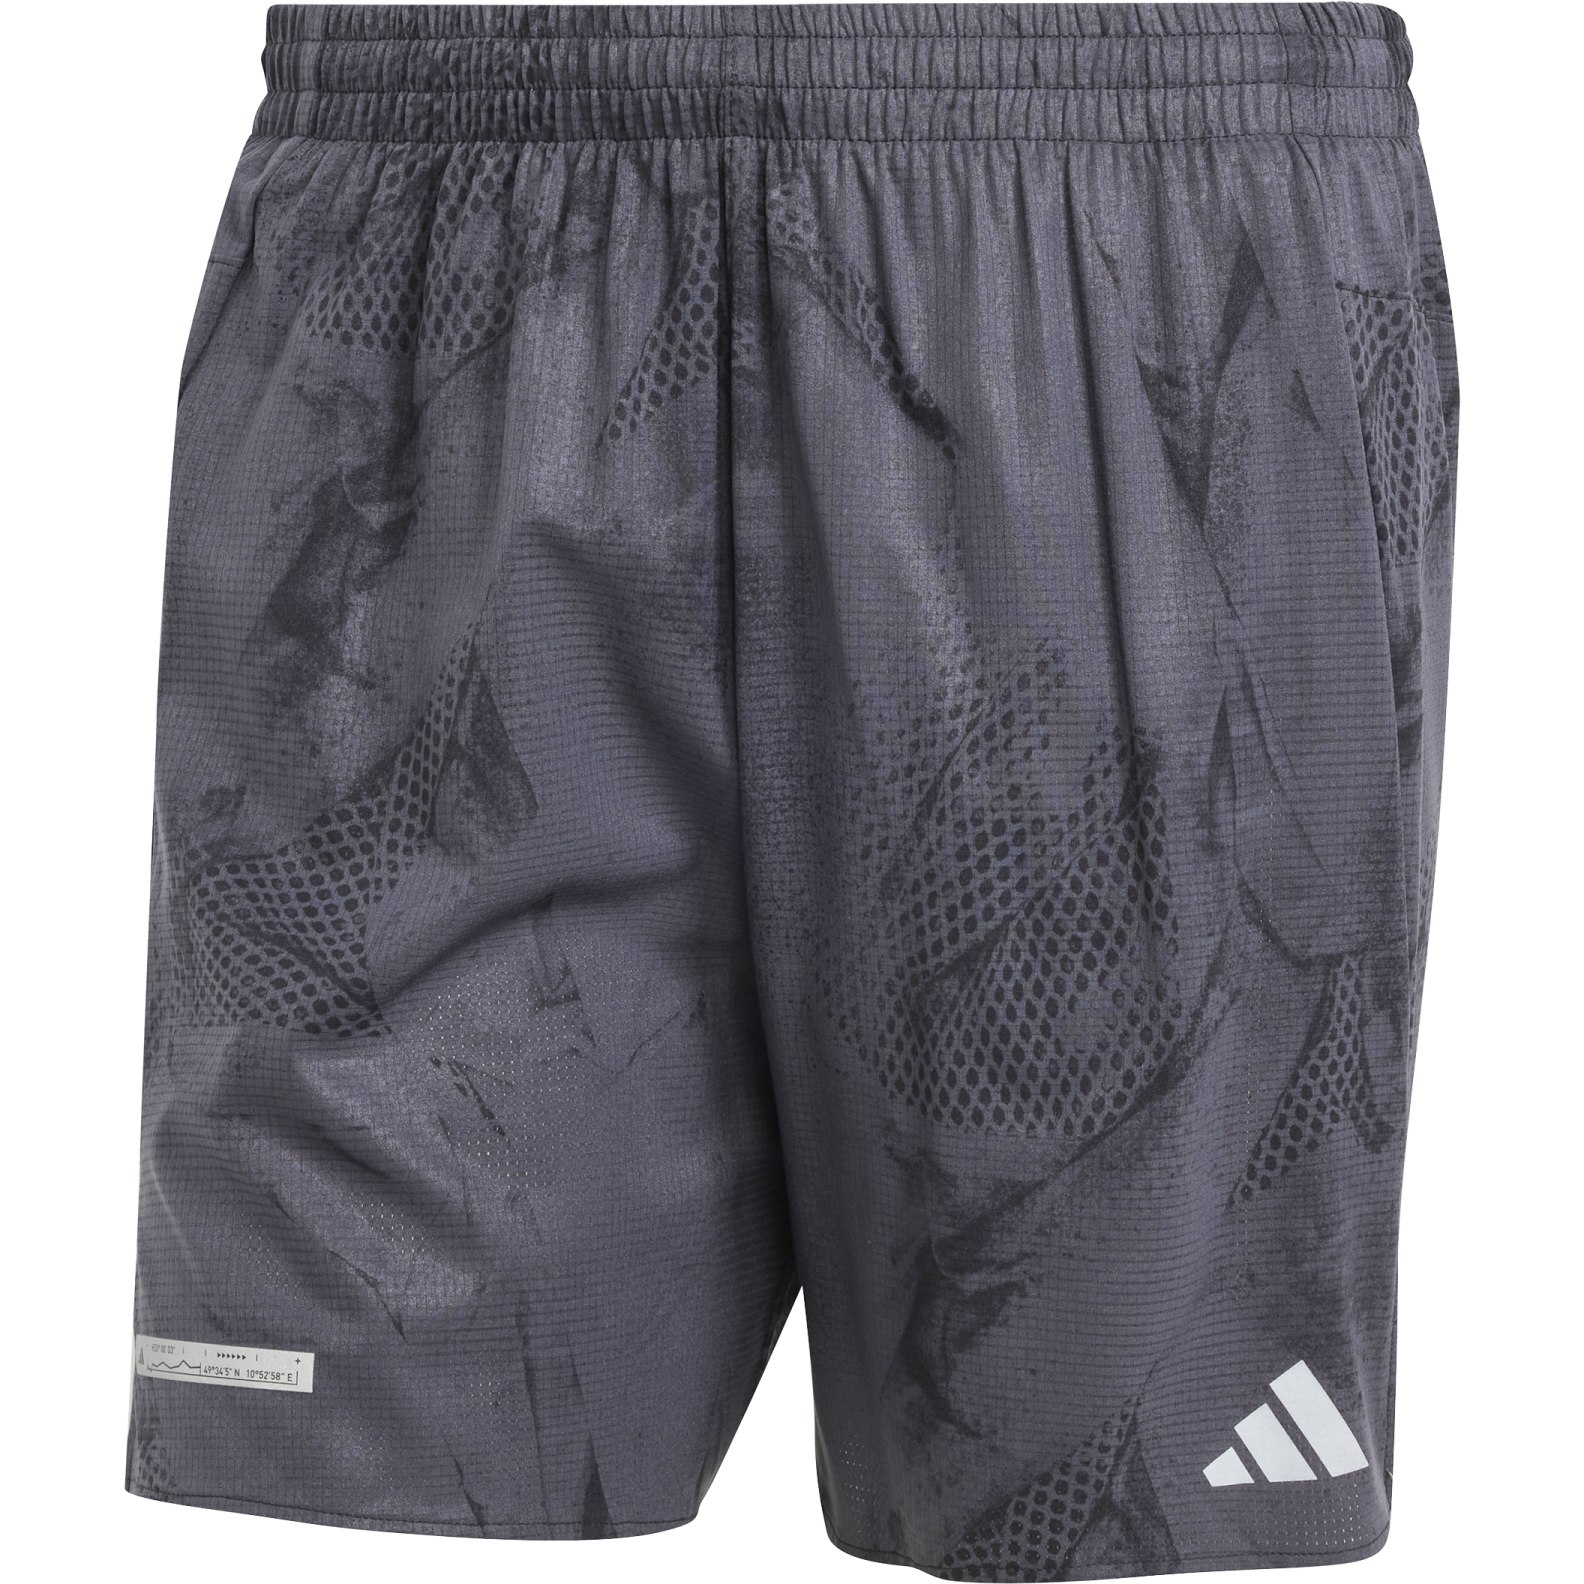 Picture of adidas Ultimate Allover Print Running Shorts Men - carbon/black IL7183